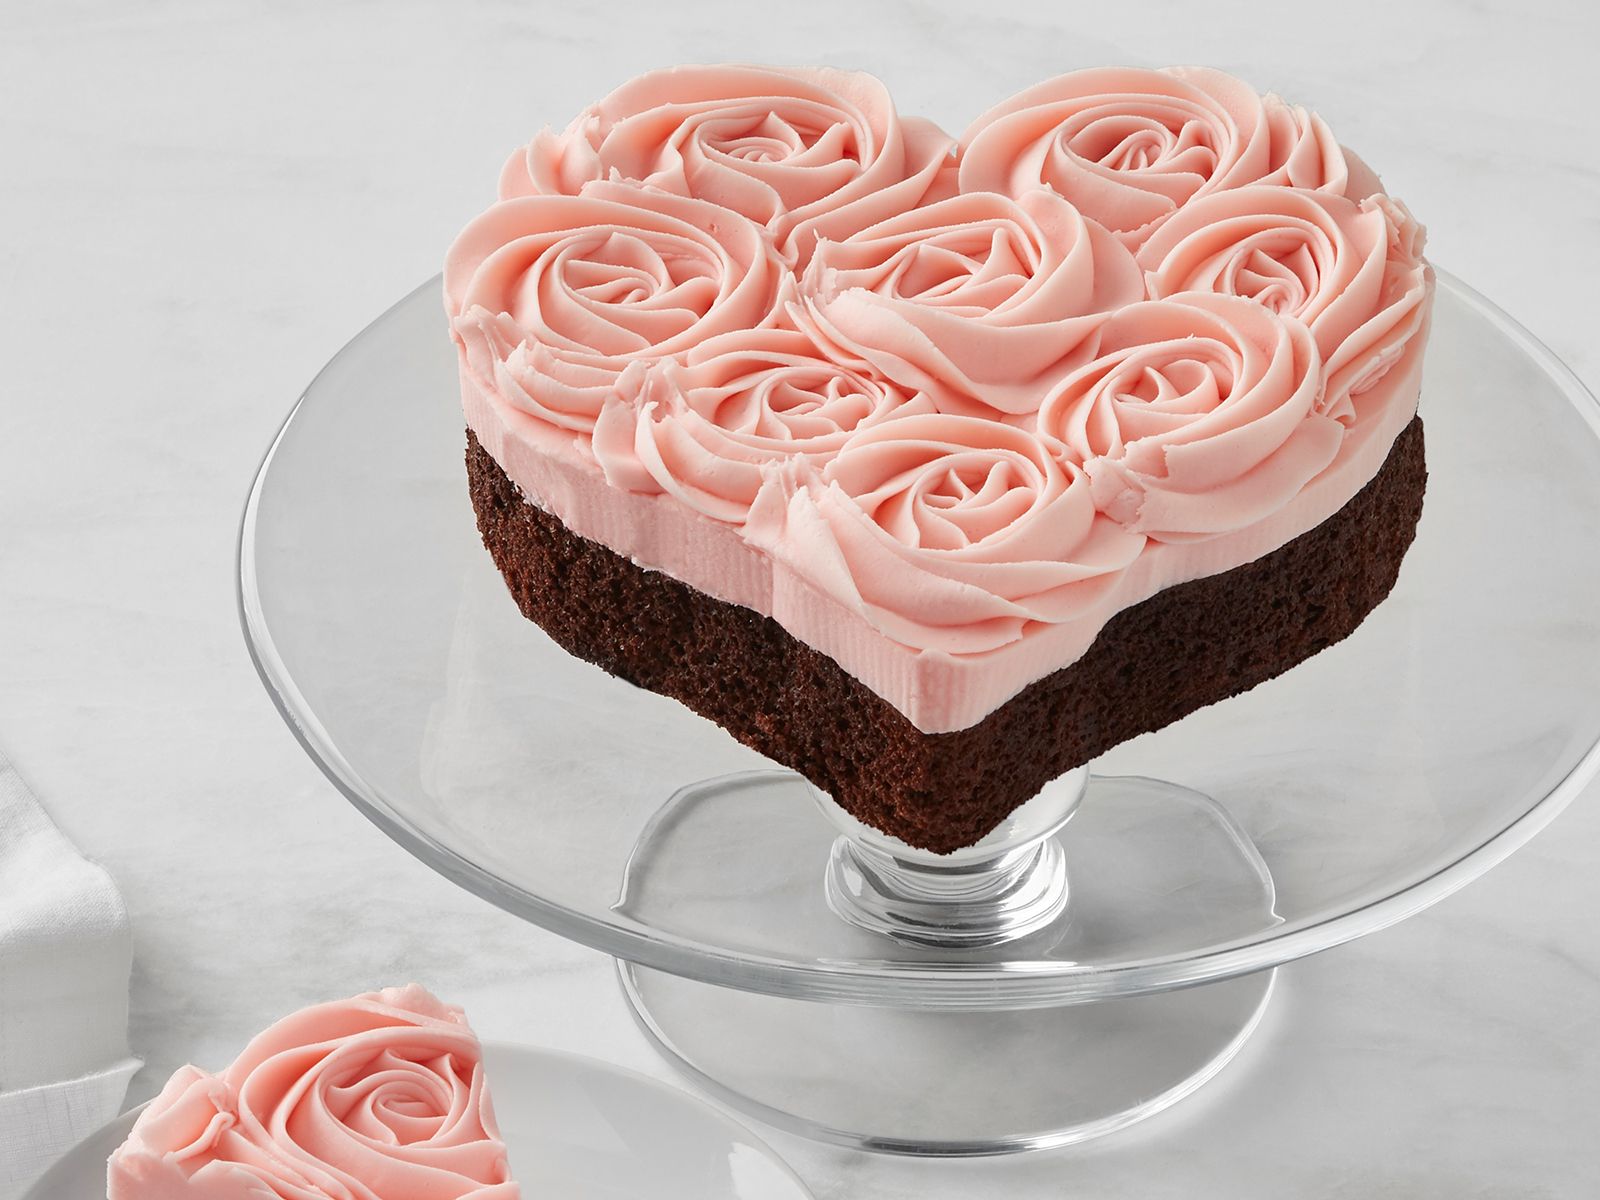 It's Not Too Late to Order These Beautiful Valentine's Day Treats. Food & Wine